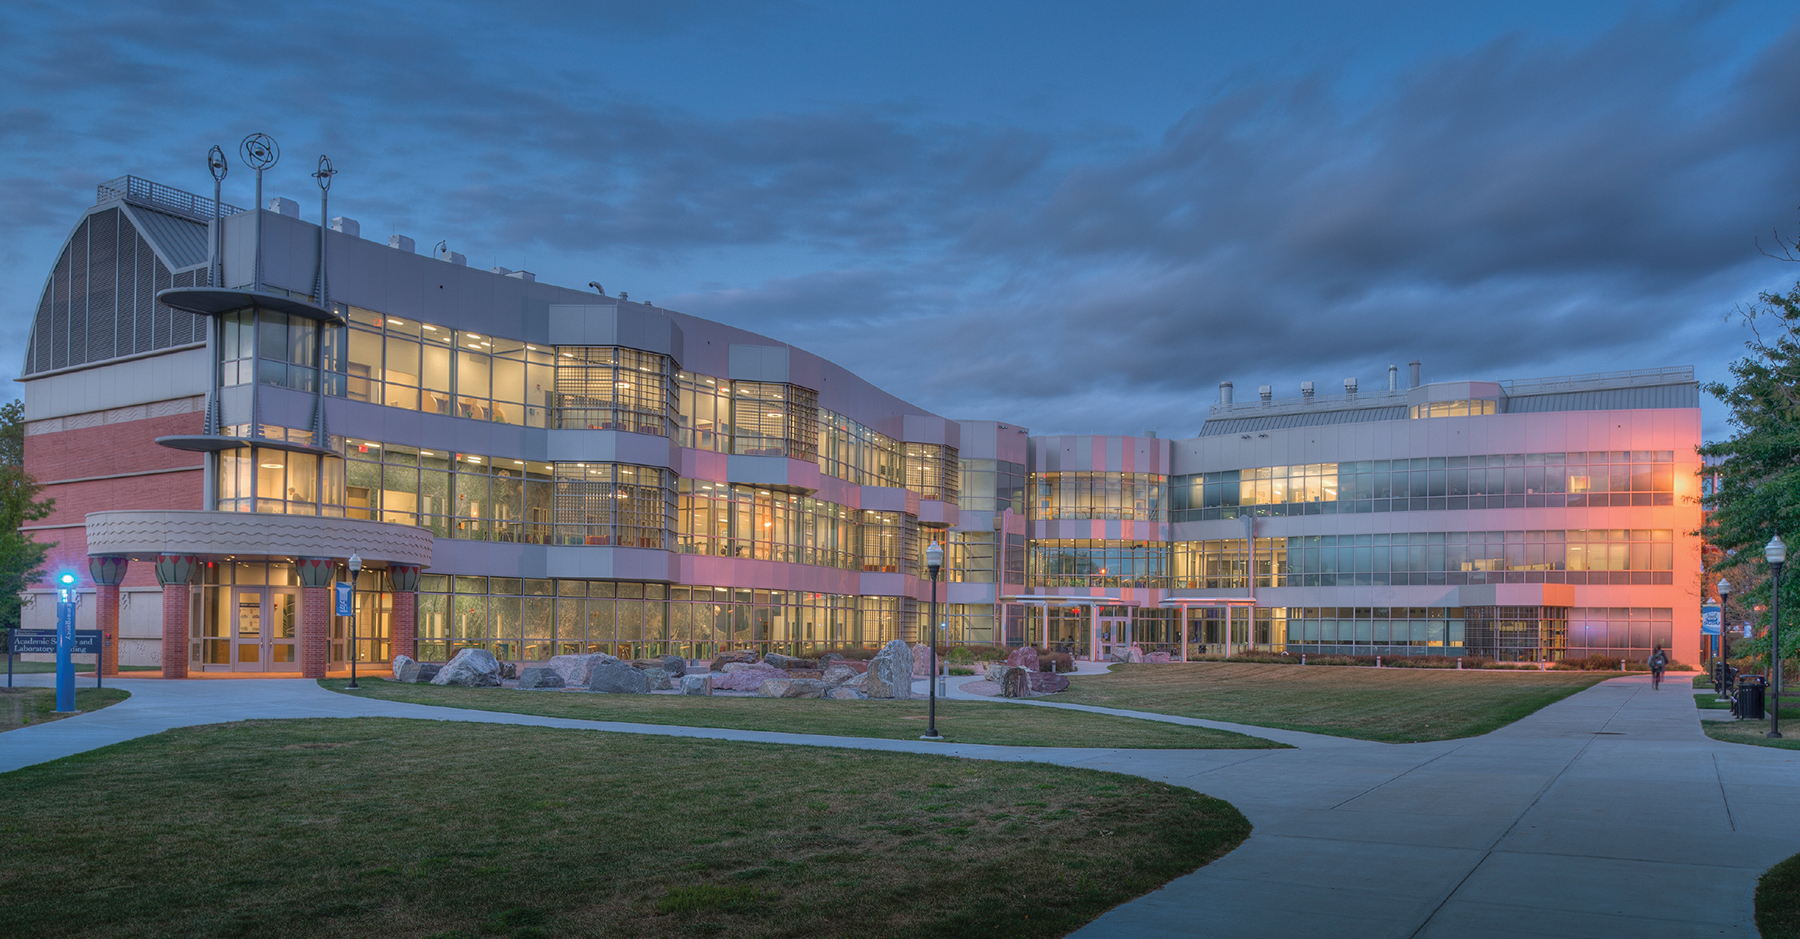 scsu-s-104-000-s-f-academic-science-laboratory-building-earns-leed-gold-certification-nerej